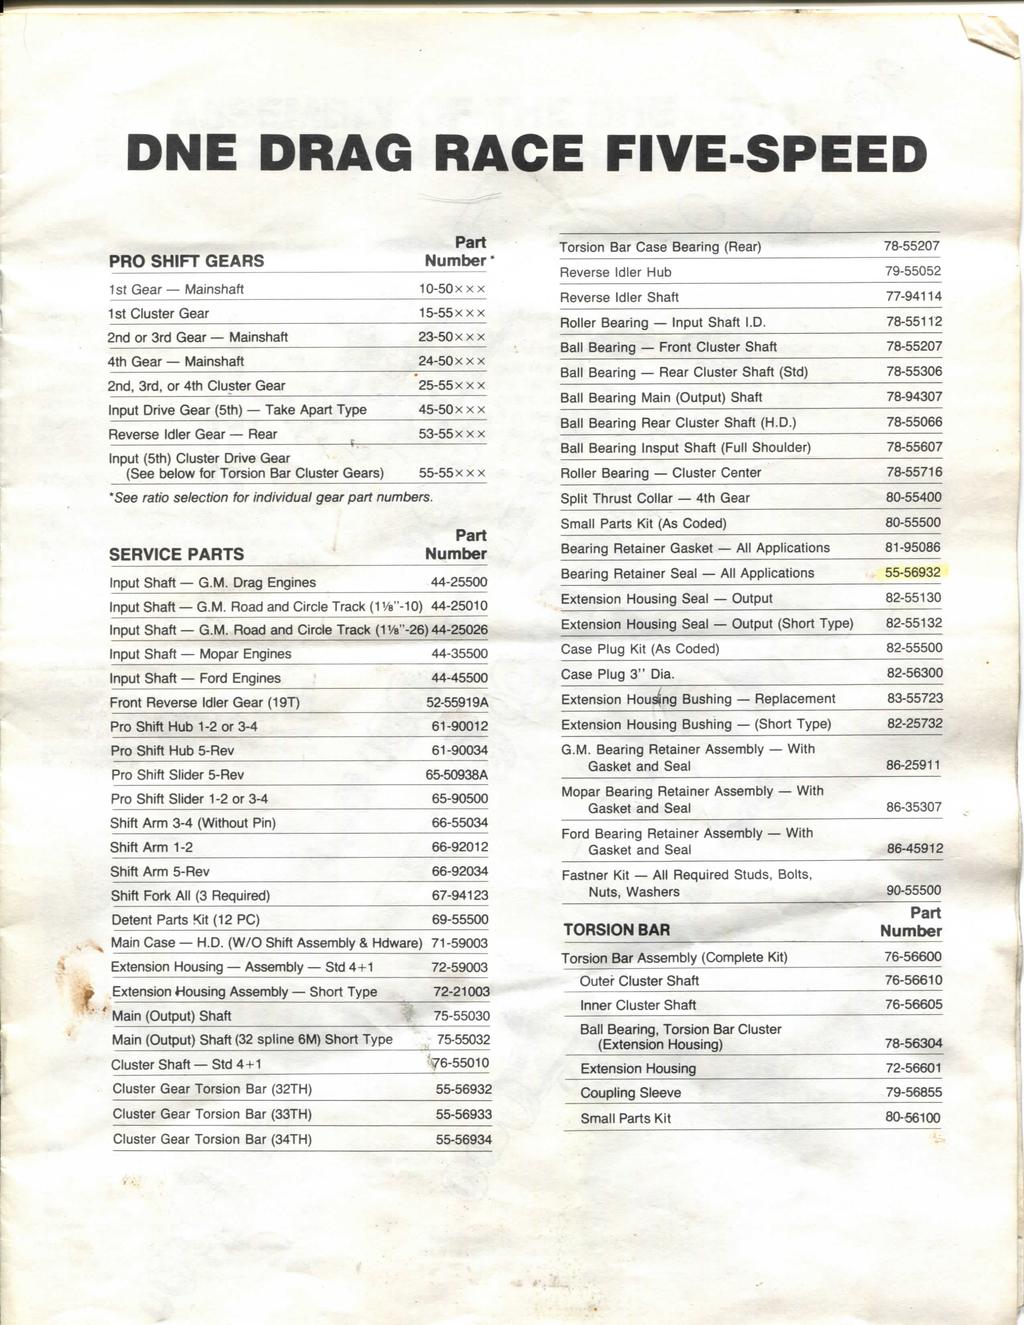 ONE DRAG RACE FIVE-SPEED PRO SHIFT GEARS 1st Gear Mainshaft 1st Cluster Gear 2nd or 3rd Gear Mainshaft 4th Gear Mainshaft 2nd, 3rd, or 4th Cluster Gear Input Drive Gear (5th) Take Apart Type Part